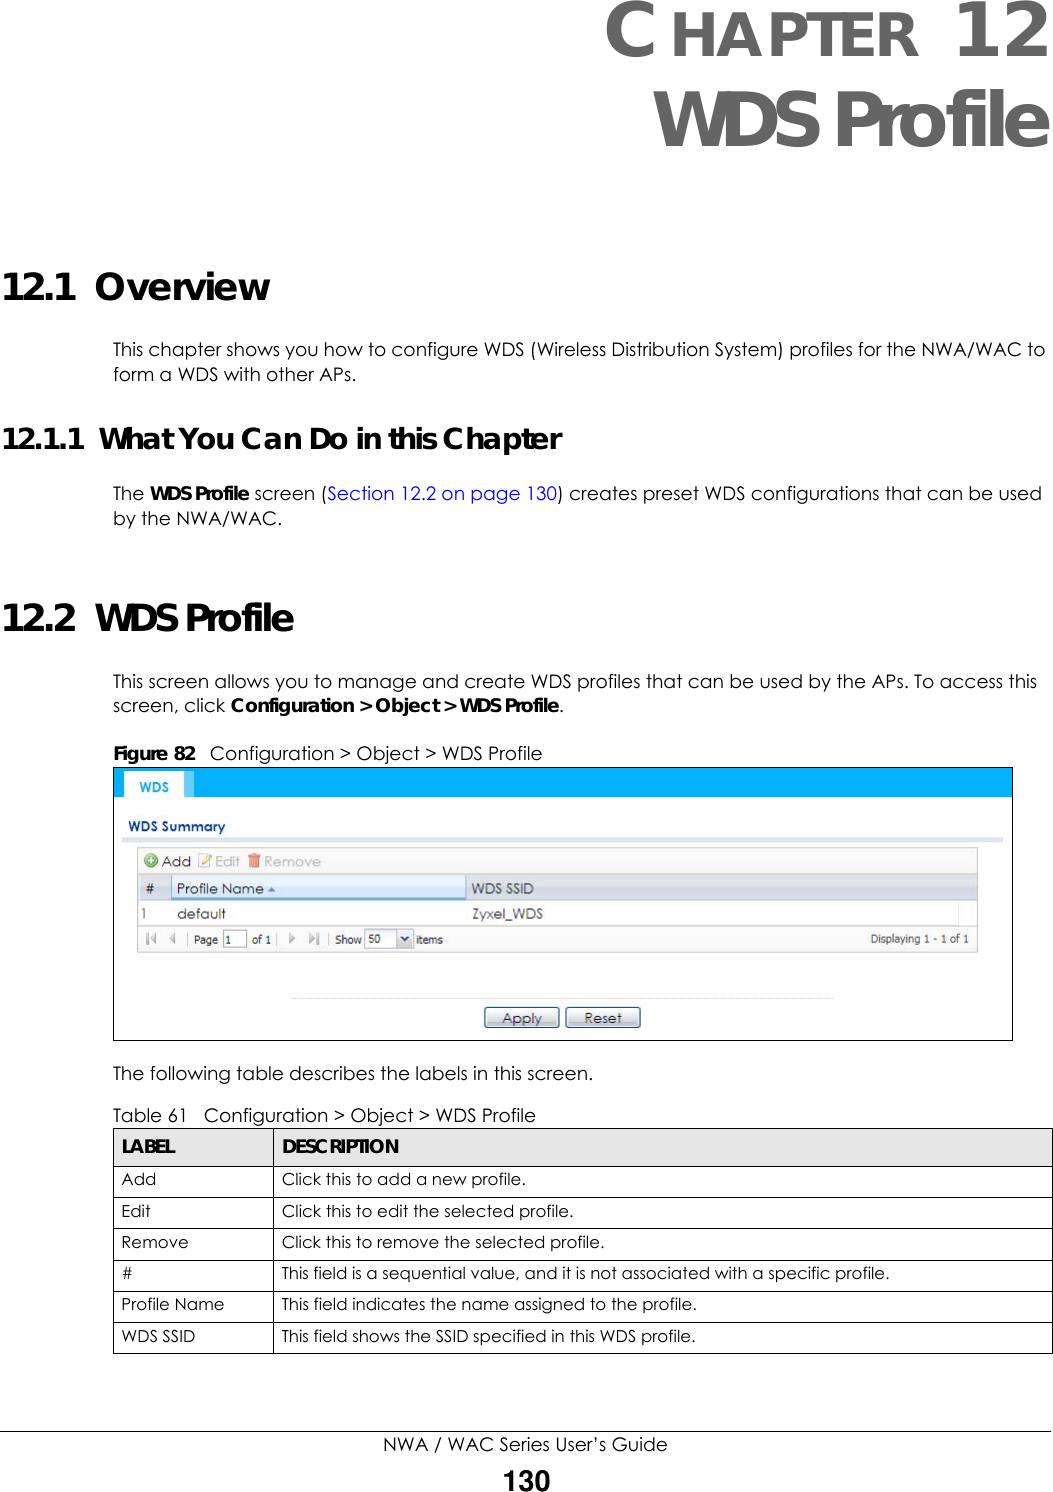 NWA / WAC Series User’s Guide130CHAPTER 12WDS Profile12.1  OverviewThis chapter shows you how to configure WDS (Wireless Distribution System) profiles for the NWA/WAC to form a WDS with other APs.12.1.1  What You Can Do in this ChapterThe WDS Profile screen (Section 12.2 on page 130) creates preset WDS configurations that can be used by the NWA/WAC.12.2  WDS Profile This screen allows you to manage and create WDS profiles that can be used by the APs. To access this screen, click Configuration &gt; Object &gt; WDS Profile.Figure 82   Configuration &gt; Object &gt; WDS ProfileThe following table describes the labels in this screen.  Table 61   Configuration &gt; Object &gt; WDS ProfileLABEL DESCRIPTIONAdd Click this to add a new profile.Edit Click this to edit the selected profile.Remove Click this to remove the selected profile.# This field is a sequential value, and it is not associated with a specific profile.Profile Name This field indicates the name assigned to the profile.WDS SSID This field shows the SSID specified in this WDS profile.